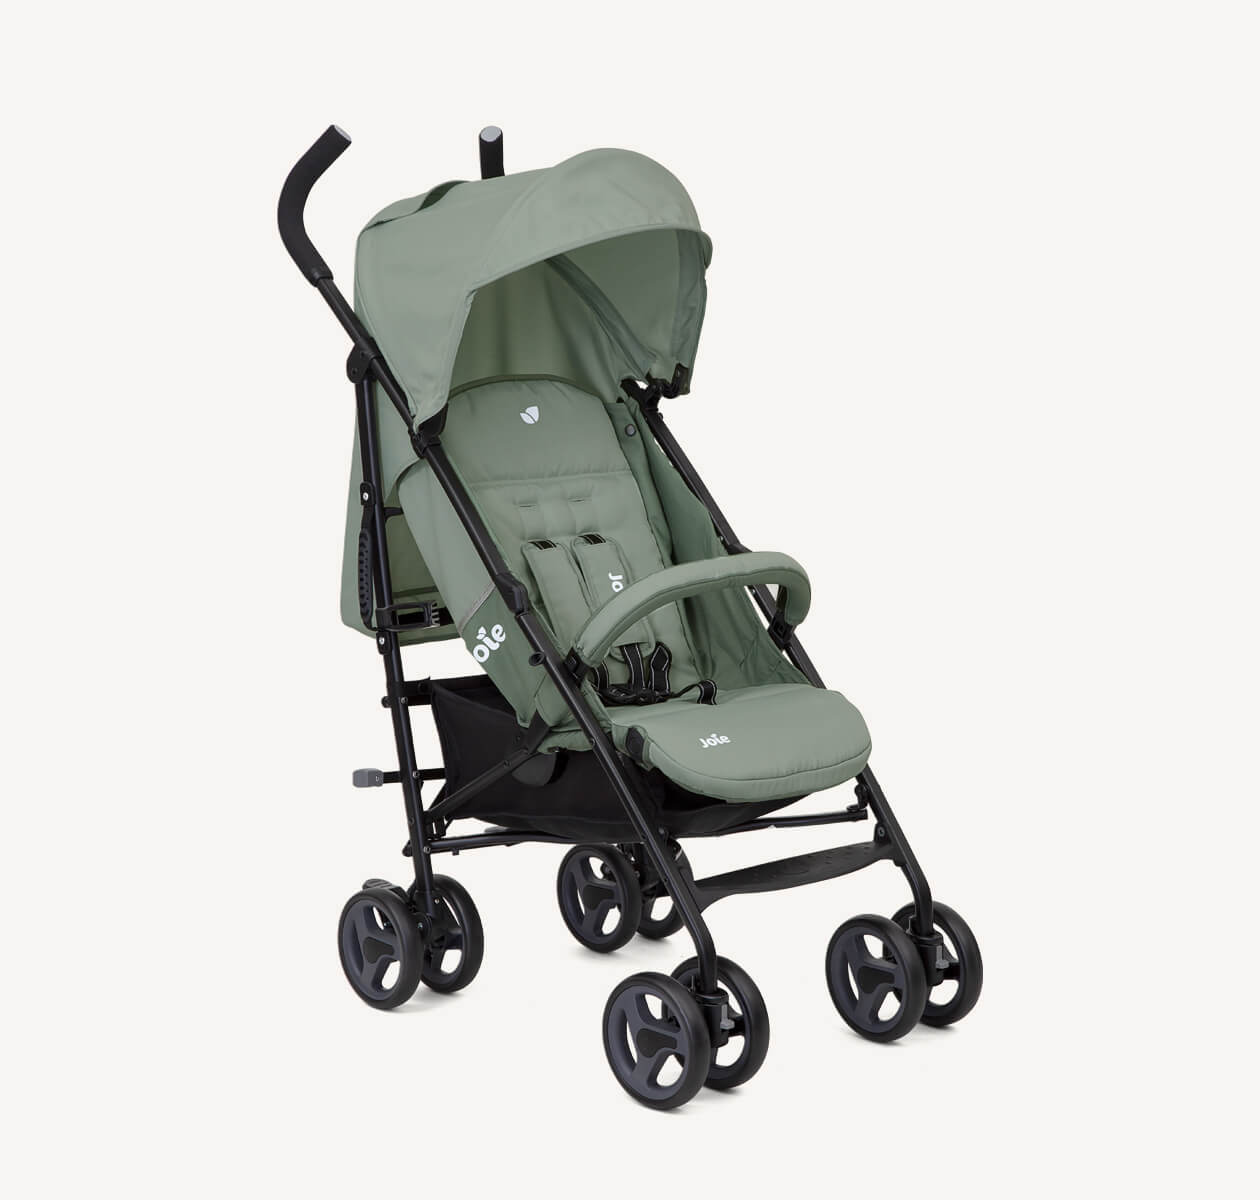 Joie laurel nitro stroller positioned at a right angle.